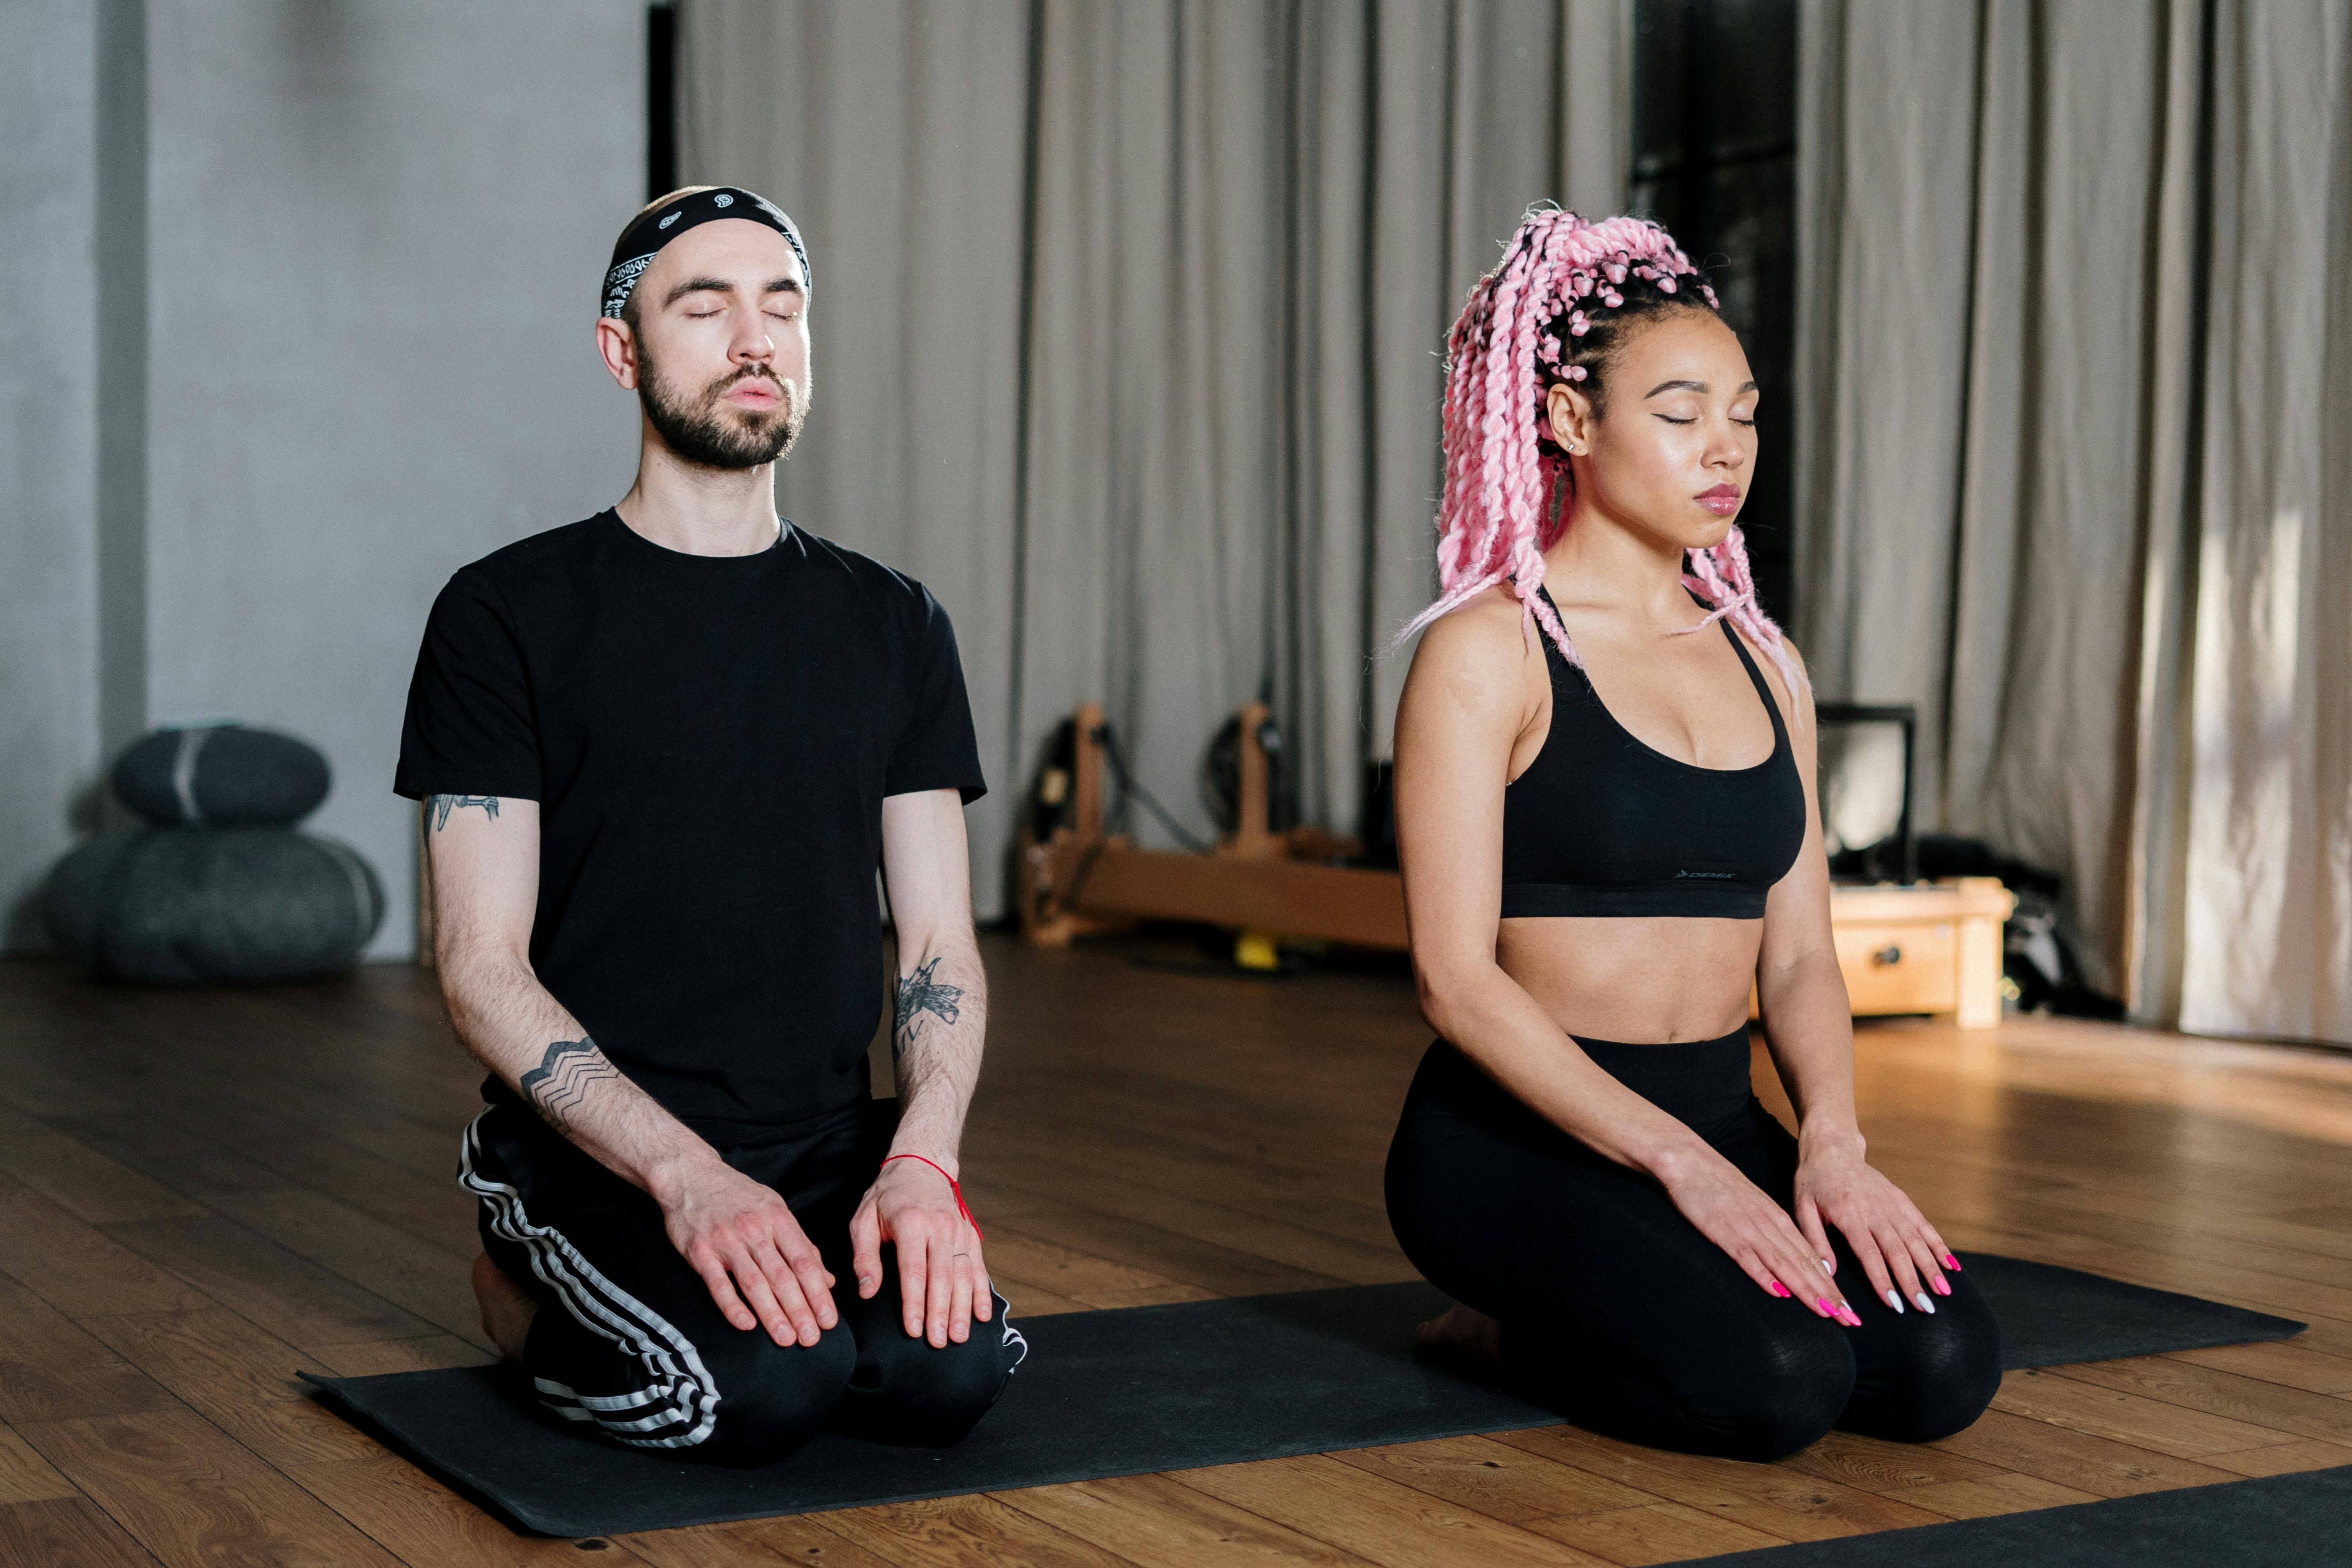 Man and woman meditating together, finding peace and balance